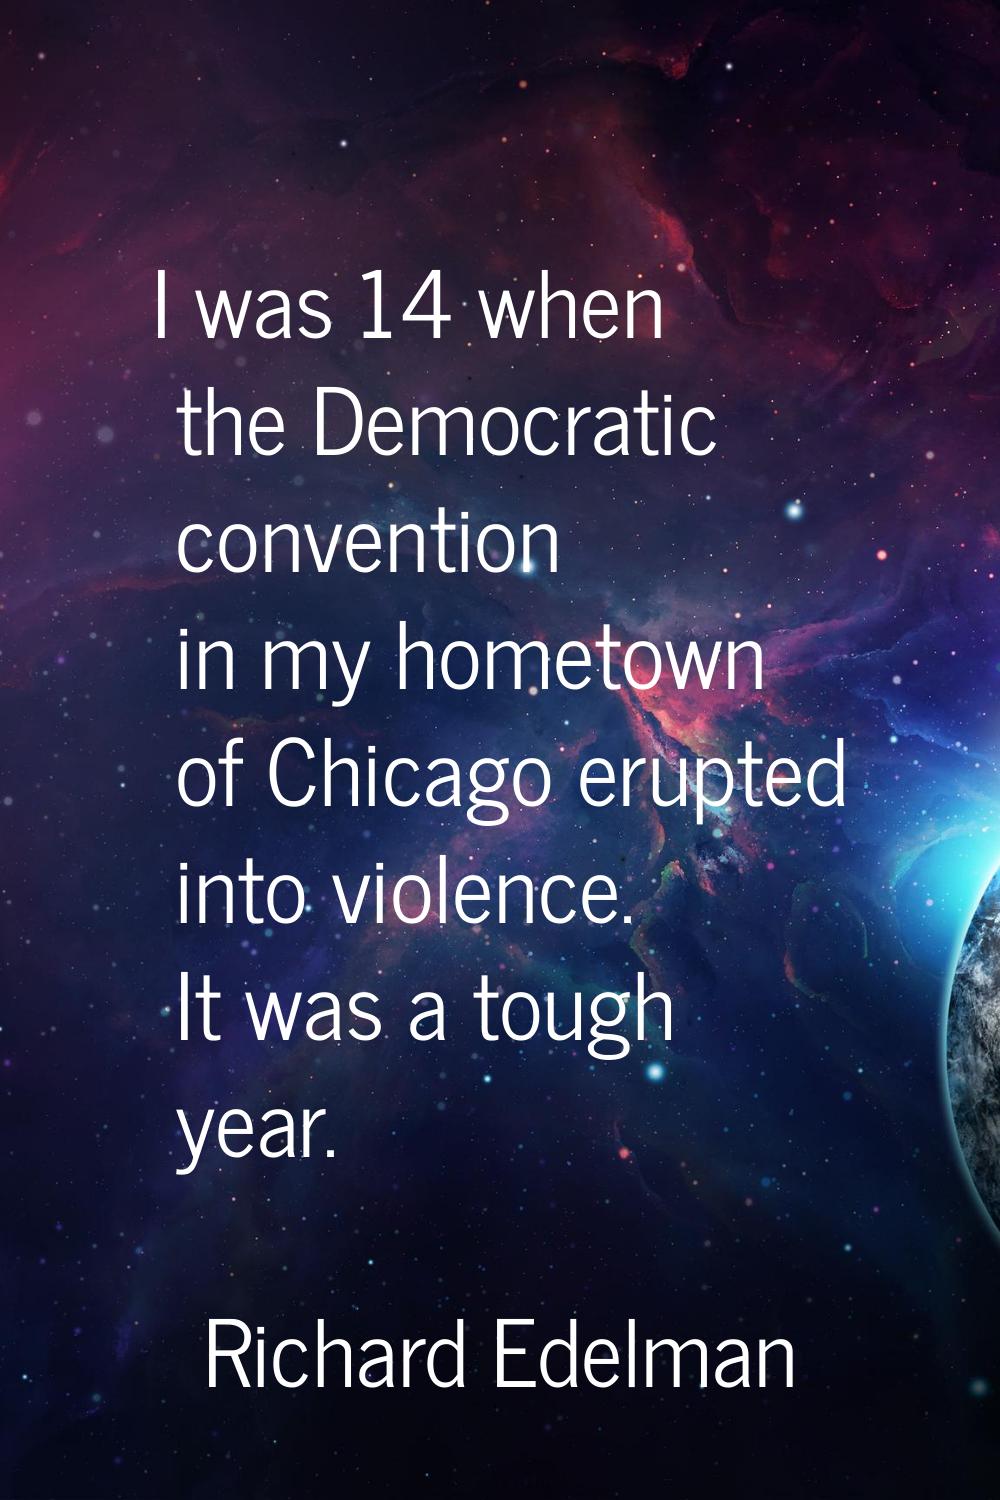 I was 14 when the Democratic convention in my hometown of Chicago erupted into violence. It was a t